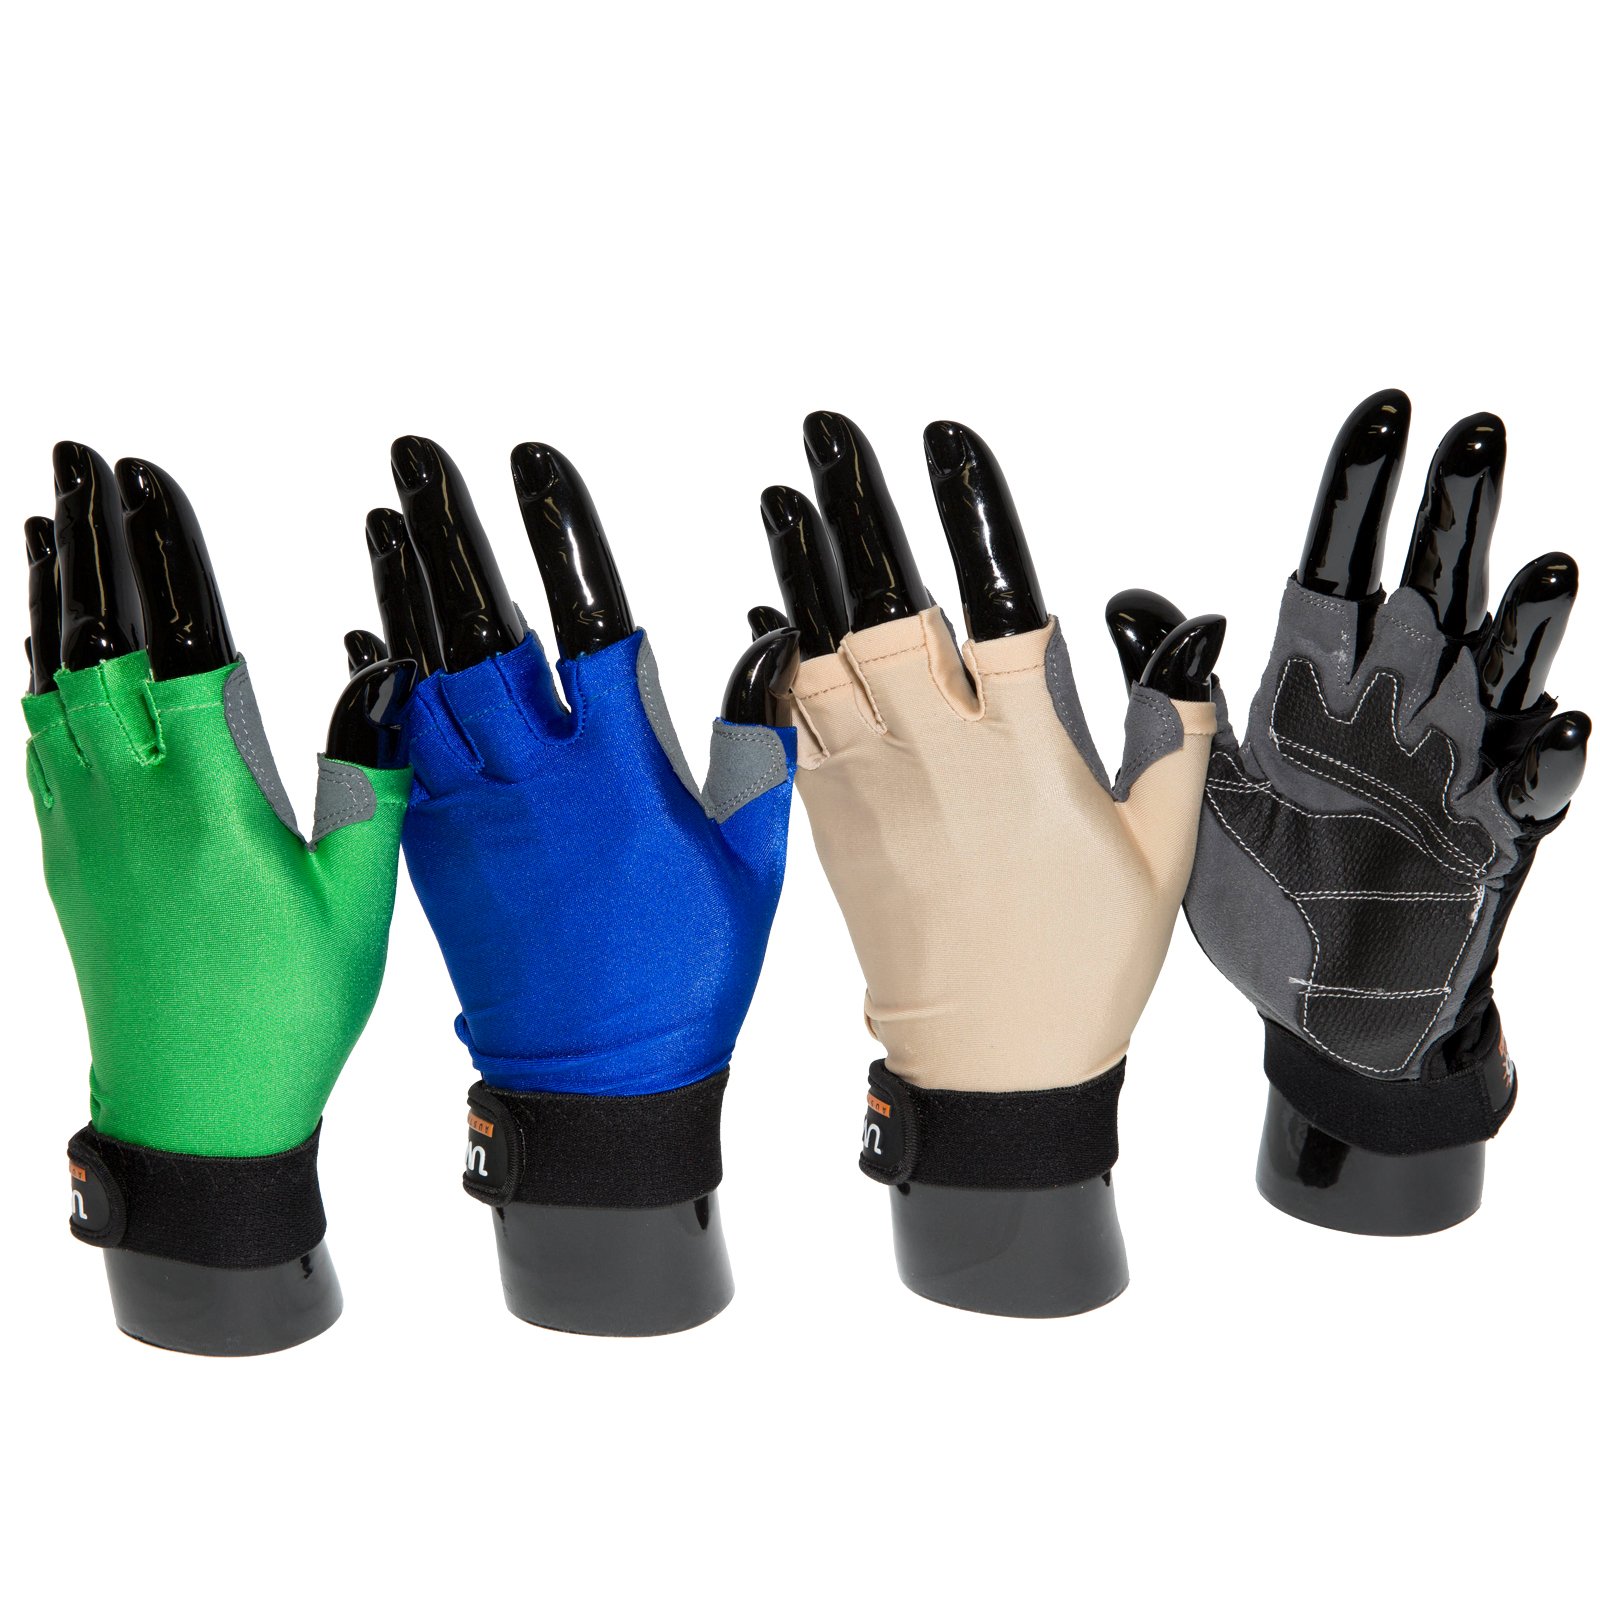 UPF 50+ Sun Safe Gloves - Driving and Fishing Gloves